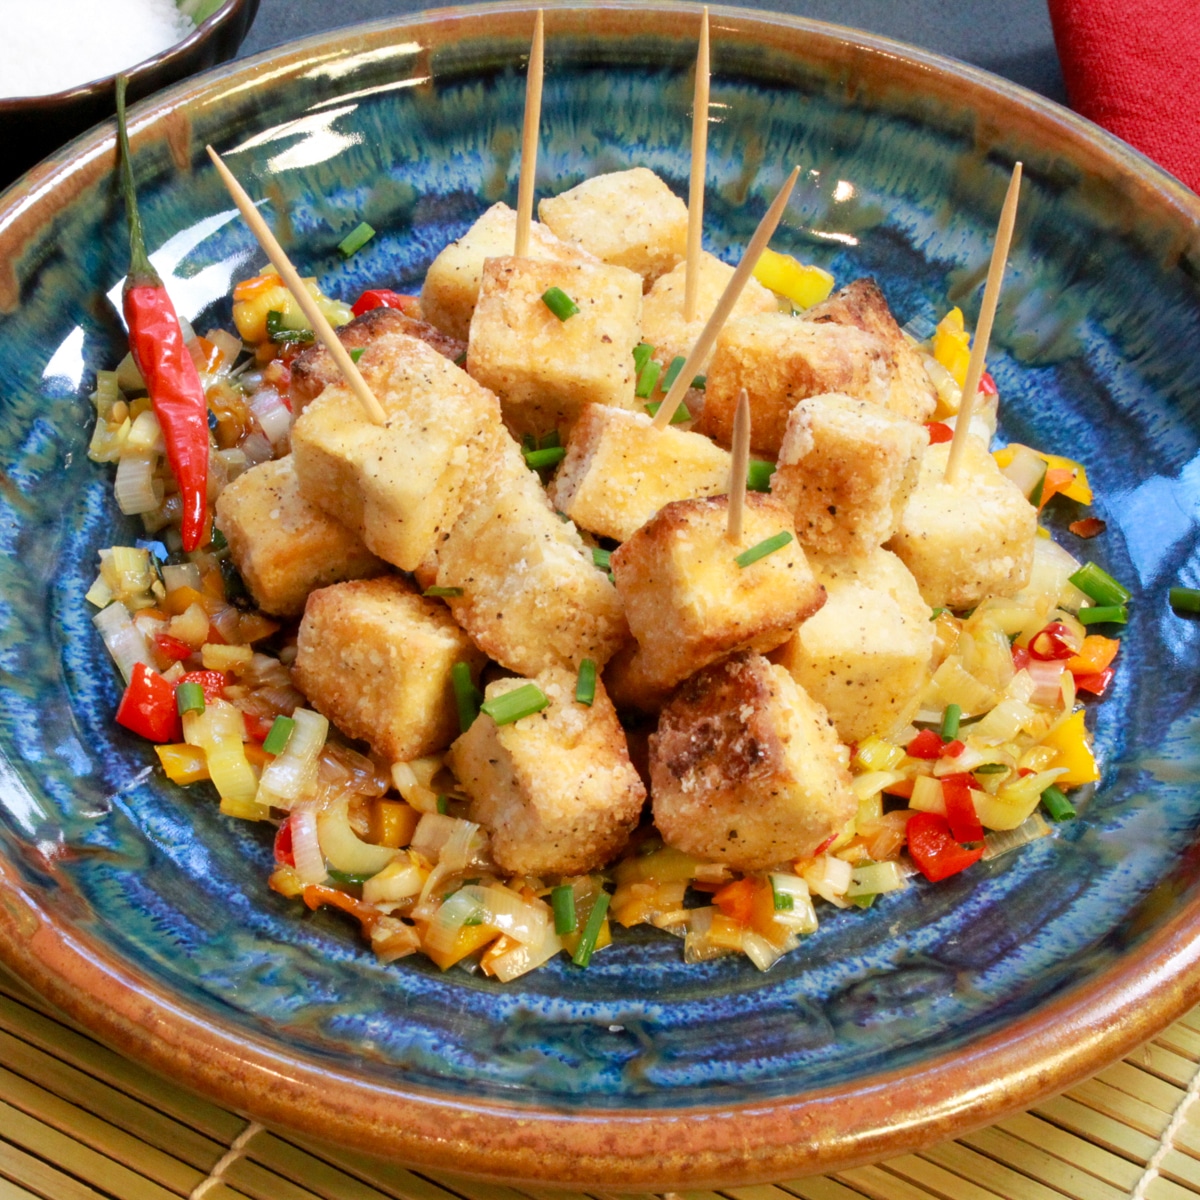 Crispy salt and pepper tofu cubes piled on top of sauteed vegetables on a round blue plate with a small bowl of salt on the side.